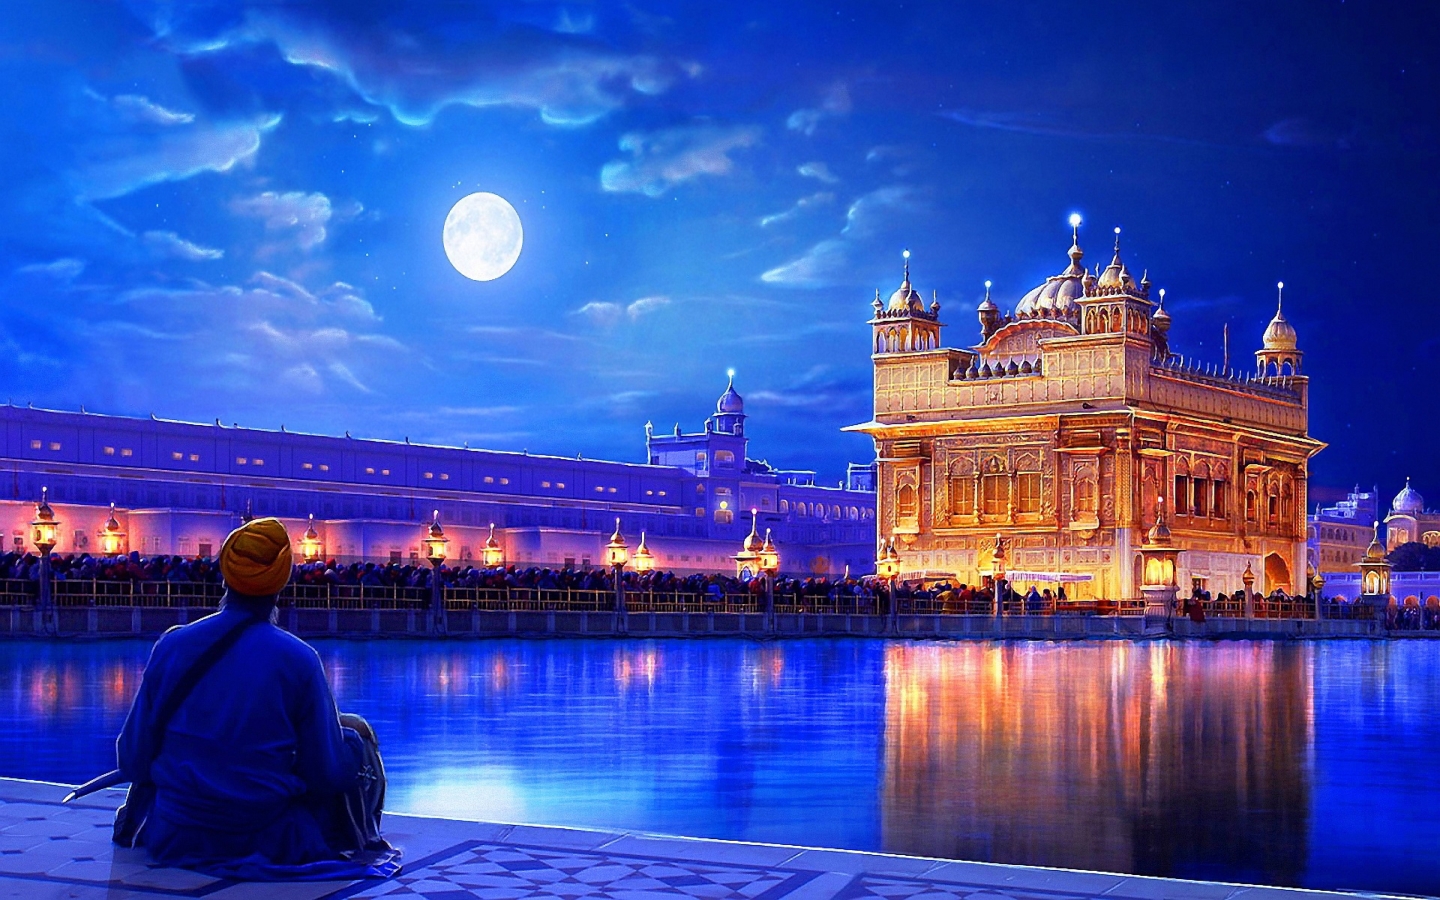 Golden Temple Amritsar India for 1440 x 900 widescreen resolution